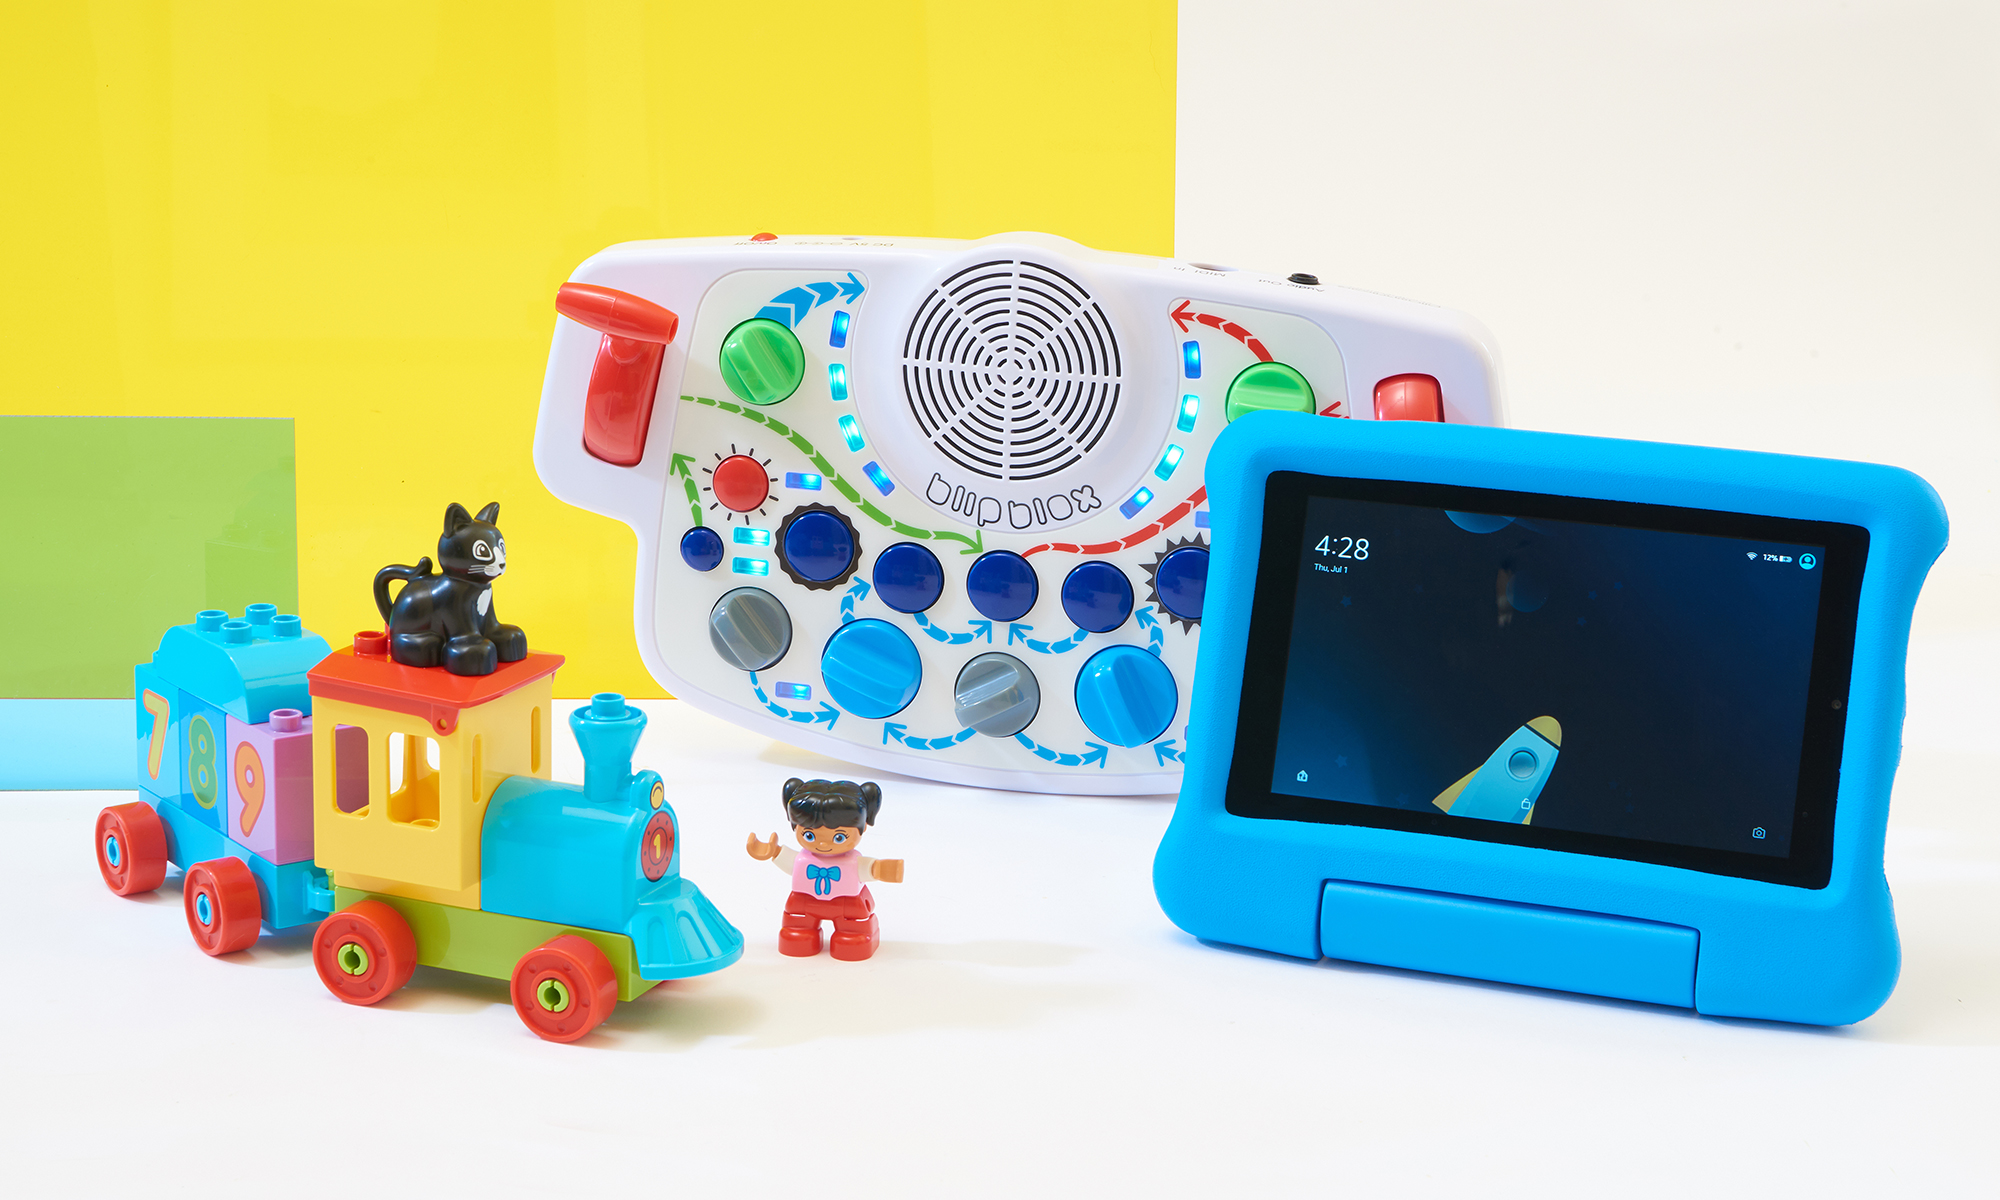 Educational Toys for Engadget's 2021 Back to School guide.